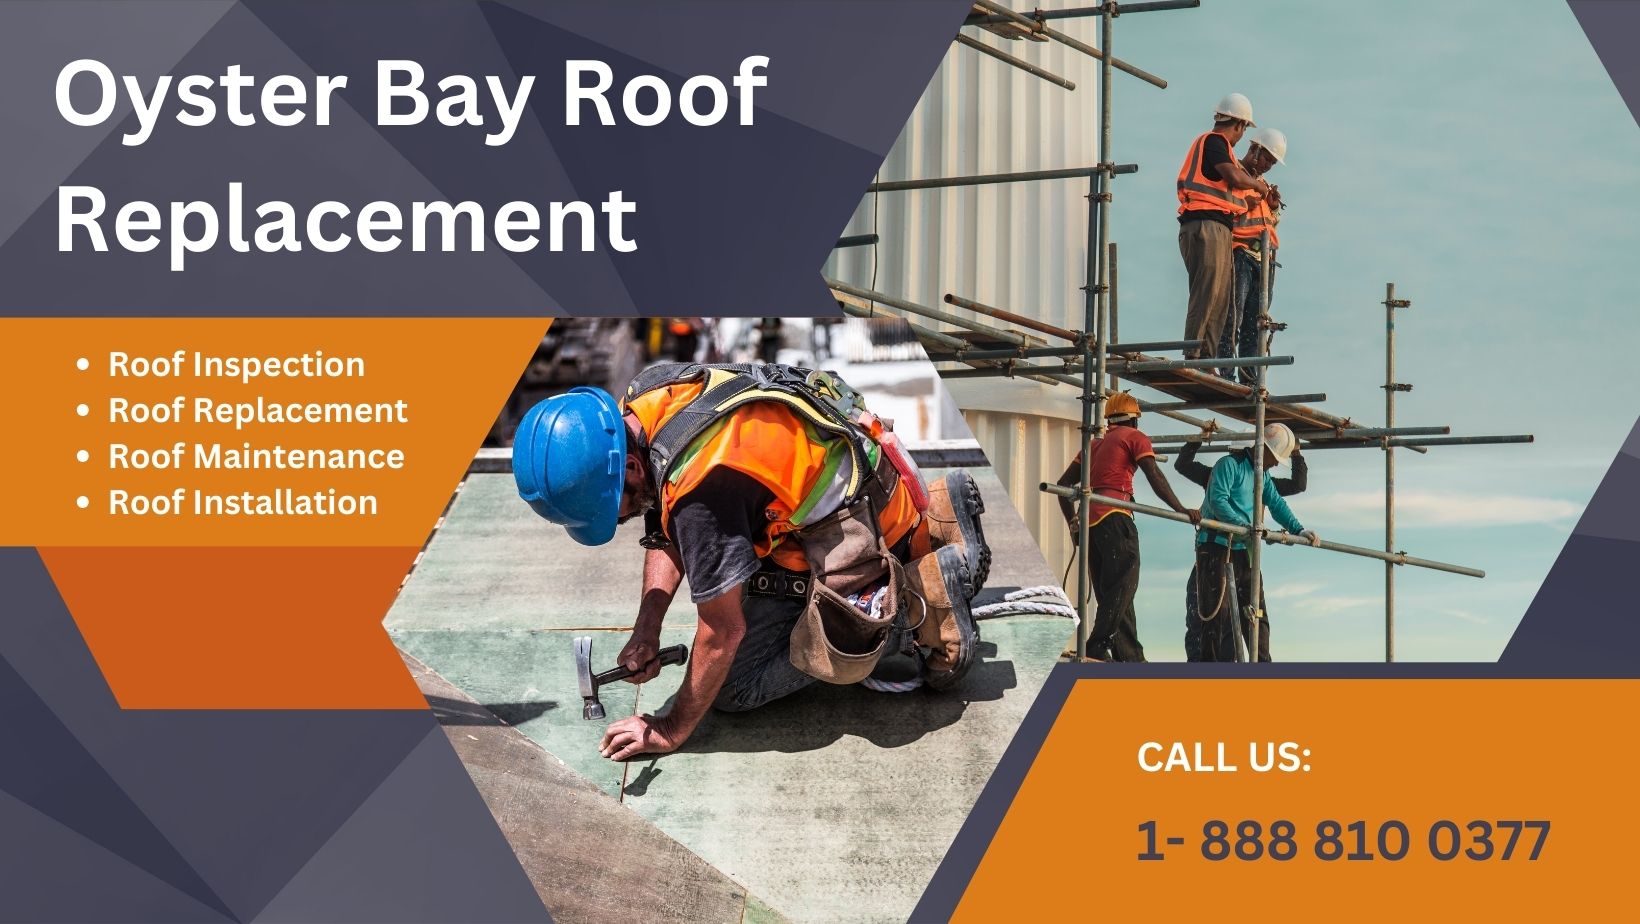 Oyster Bay Roof Replacement